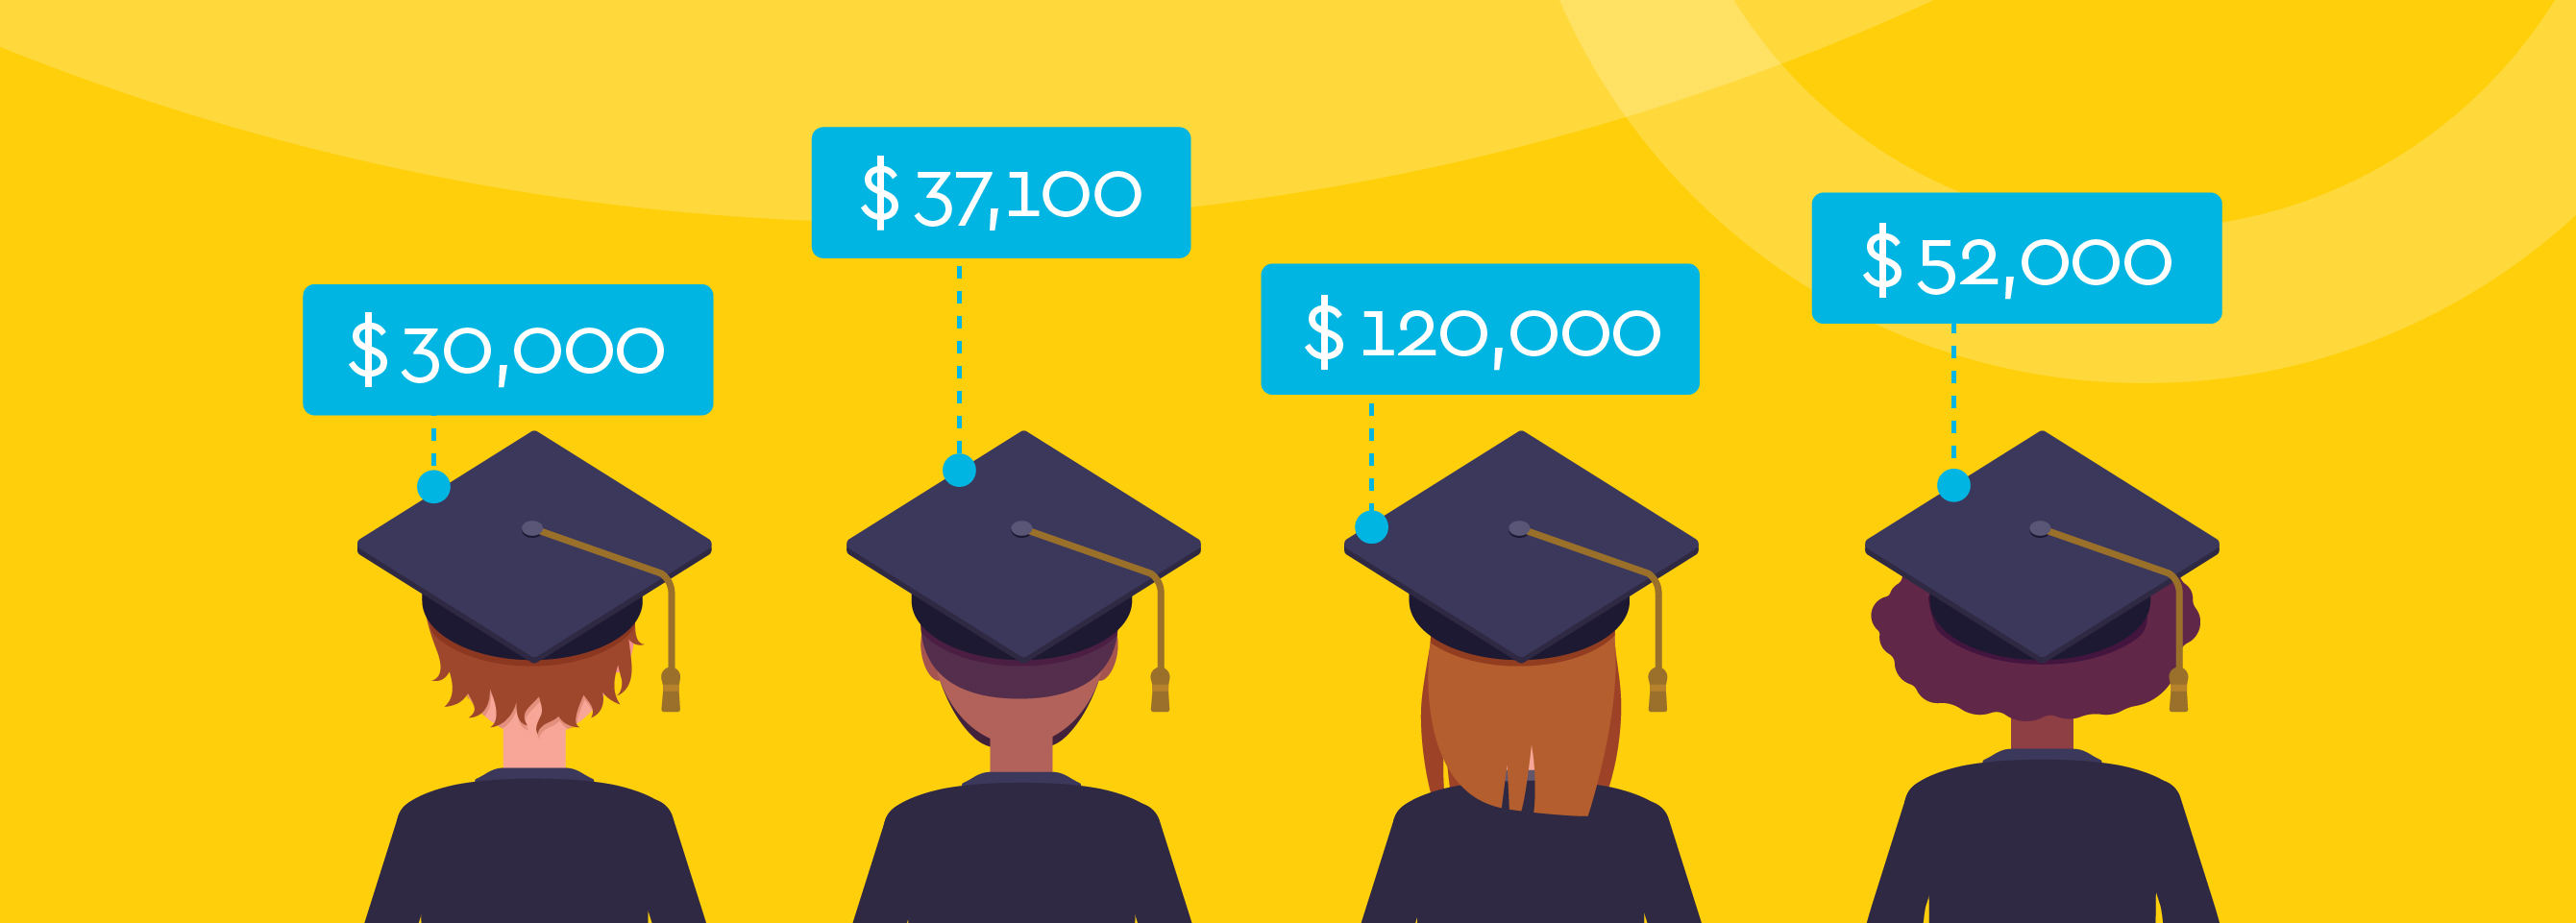 How do student loans affect families?